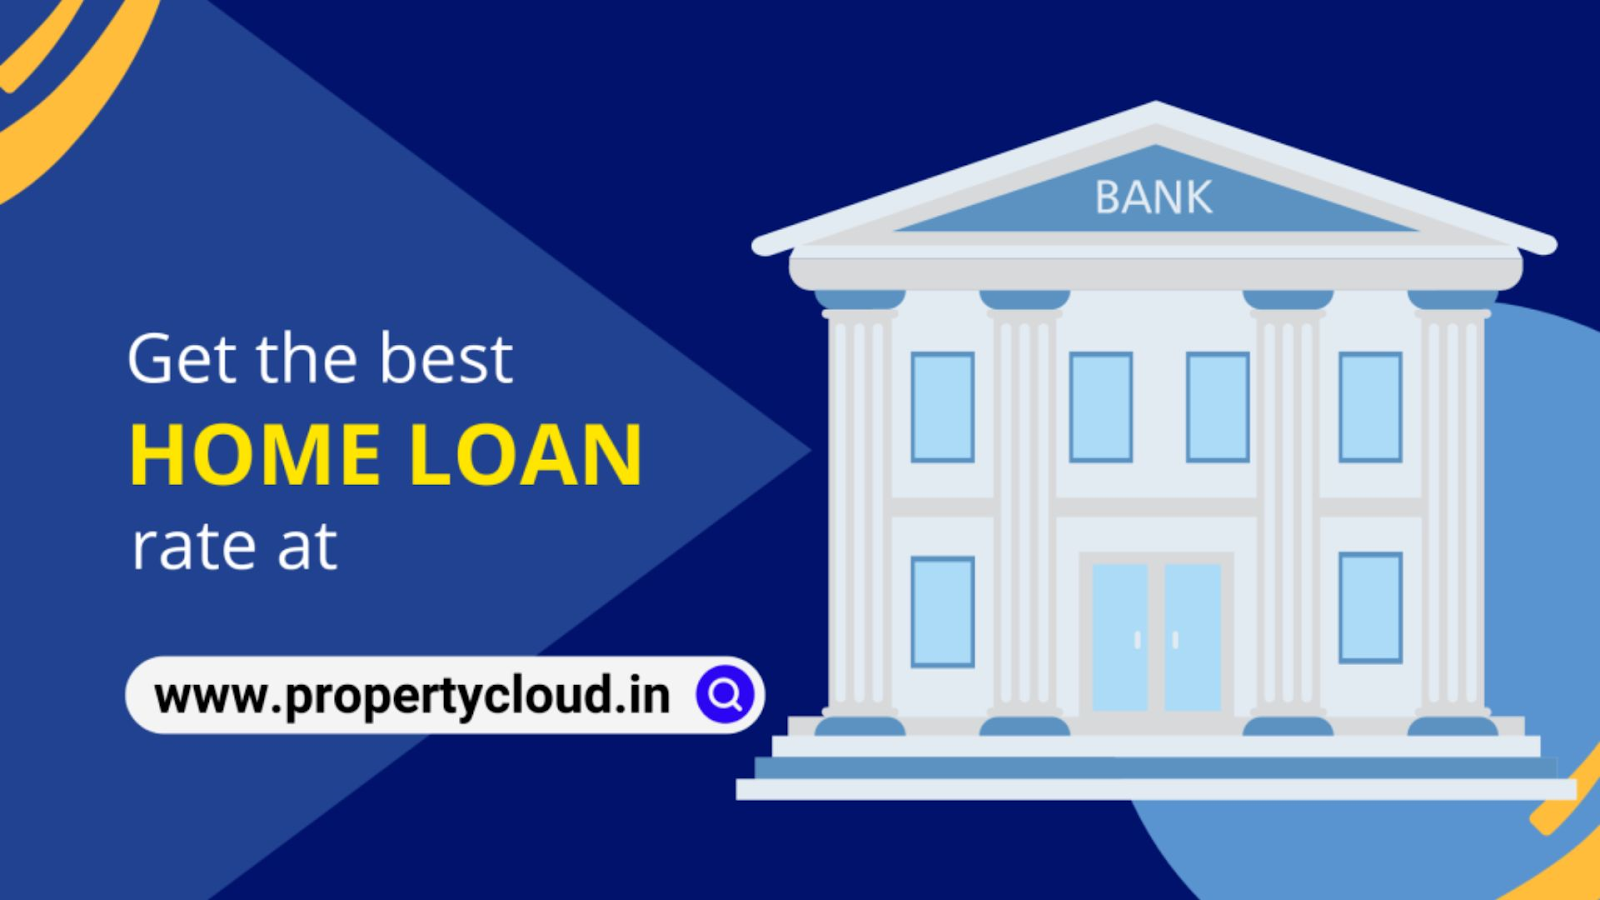 Contact PropertyCloud experts to get the lowest rate on home loans.